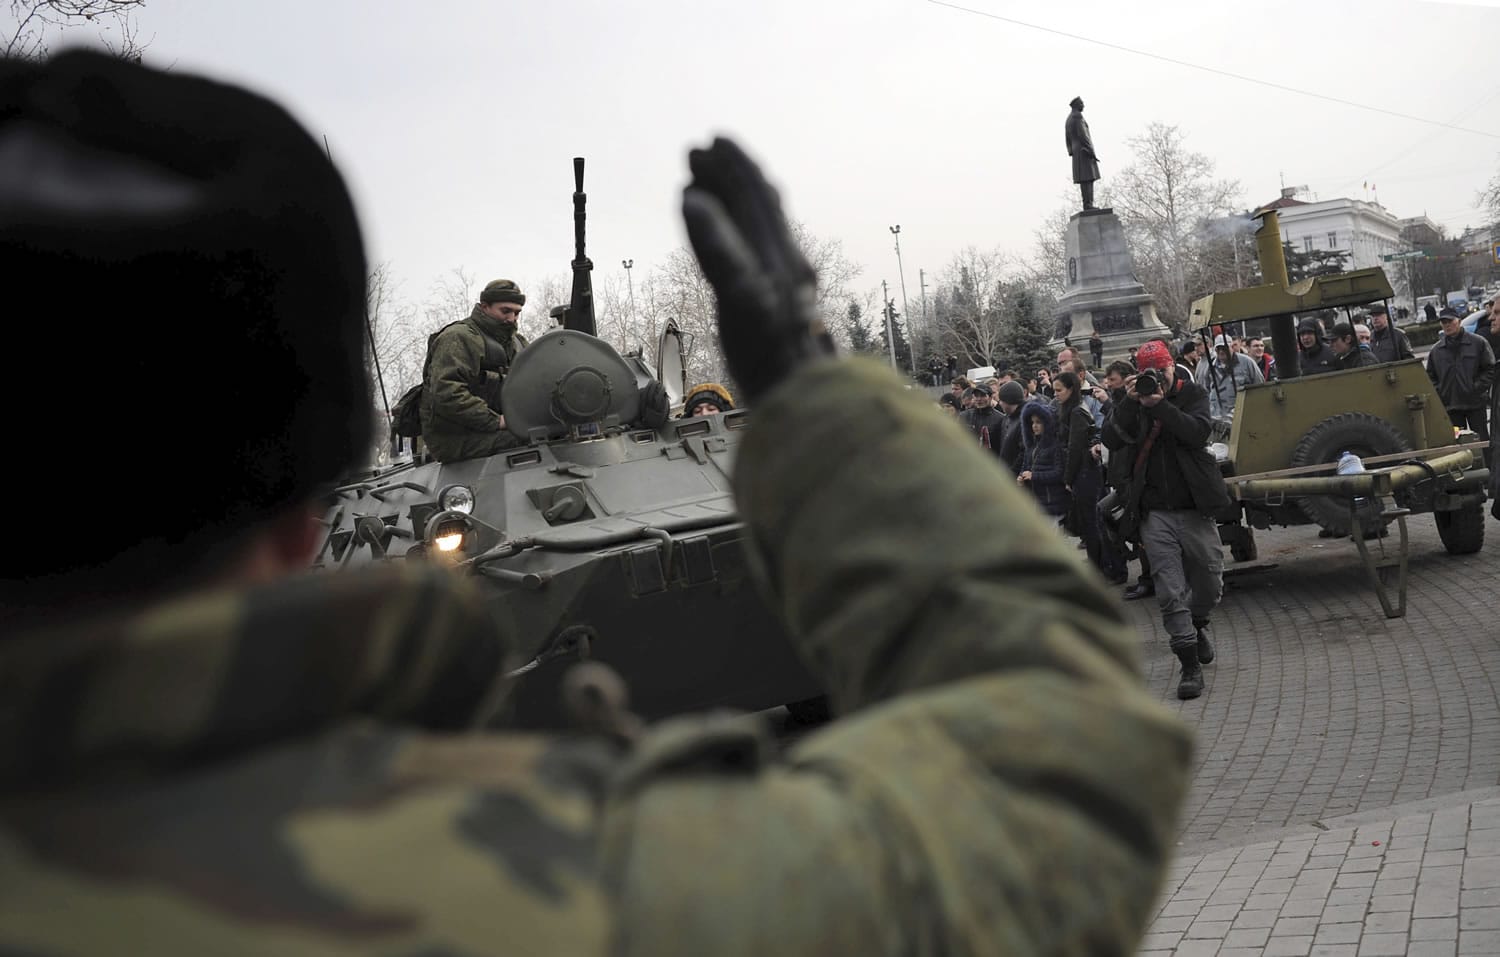 A Russian Army officer, back to camera, helps an armored personnel carrier drive on a street Tuesday in Sevastopol, Ukraine's Black Sea port.